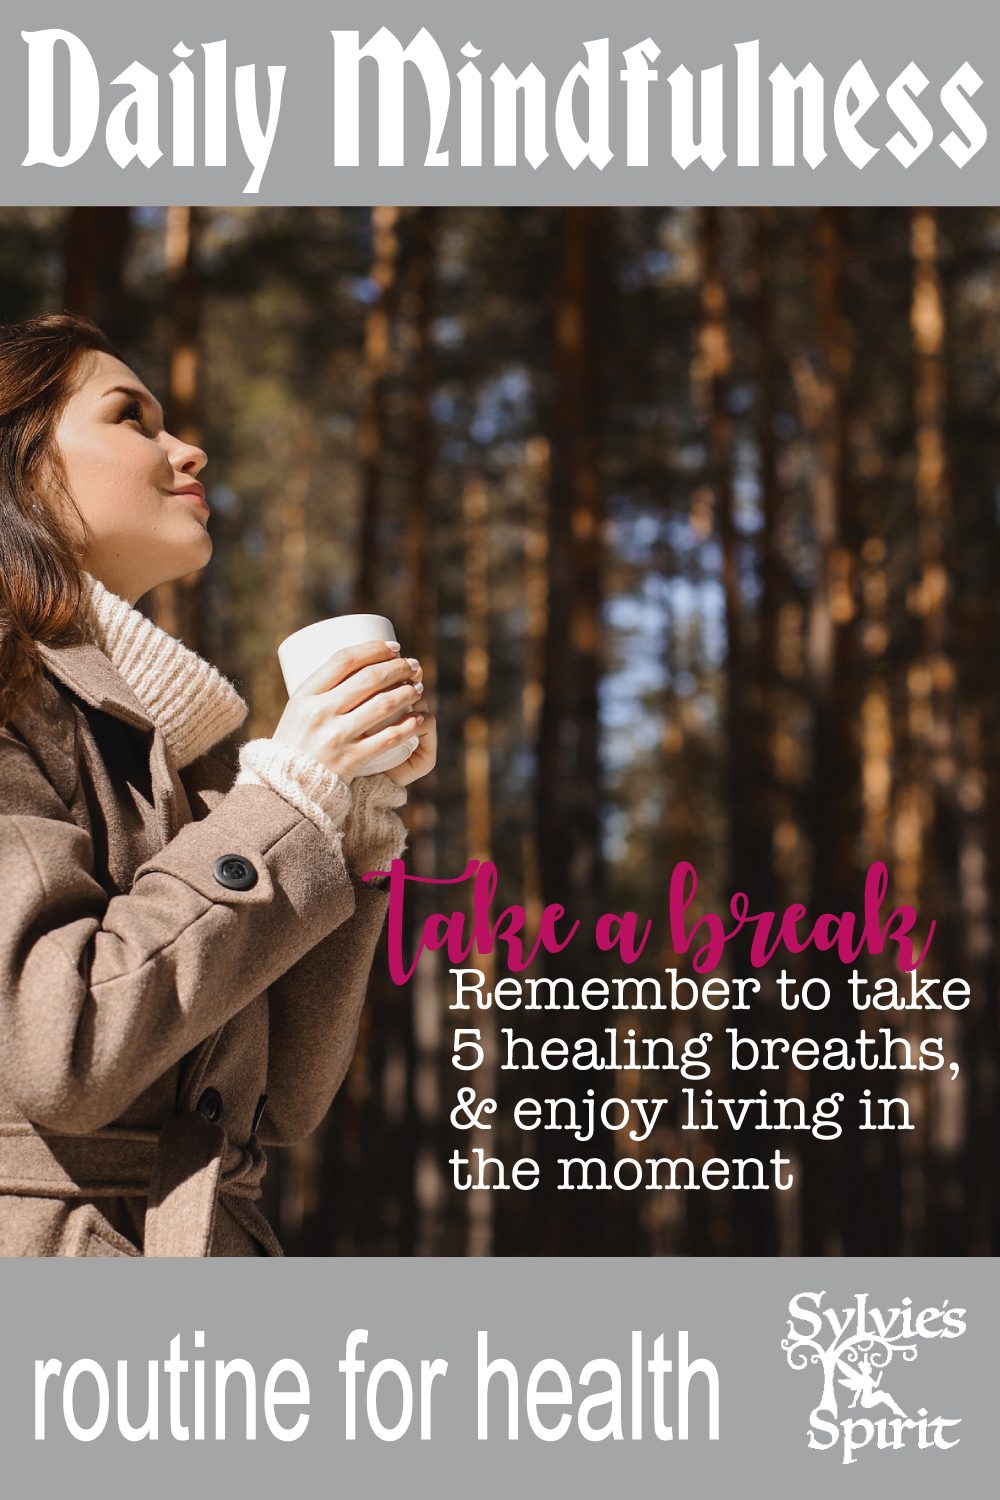 Daily Mindfulness for Health - Take a Break